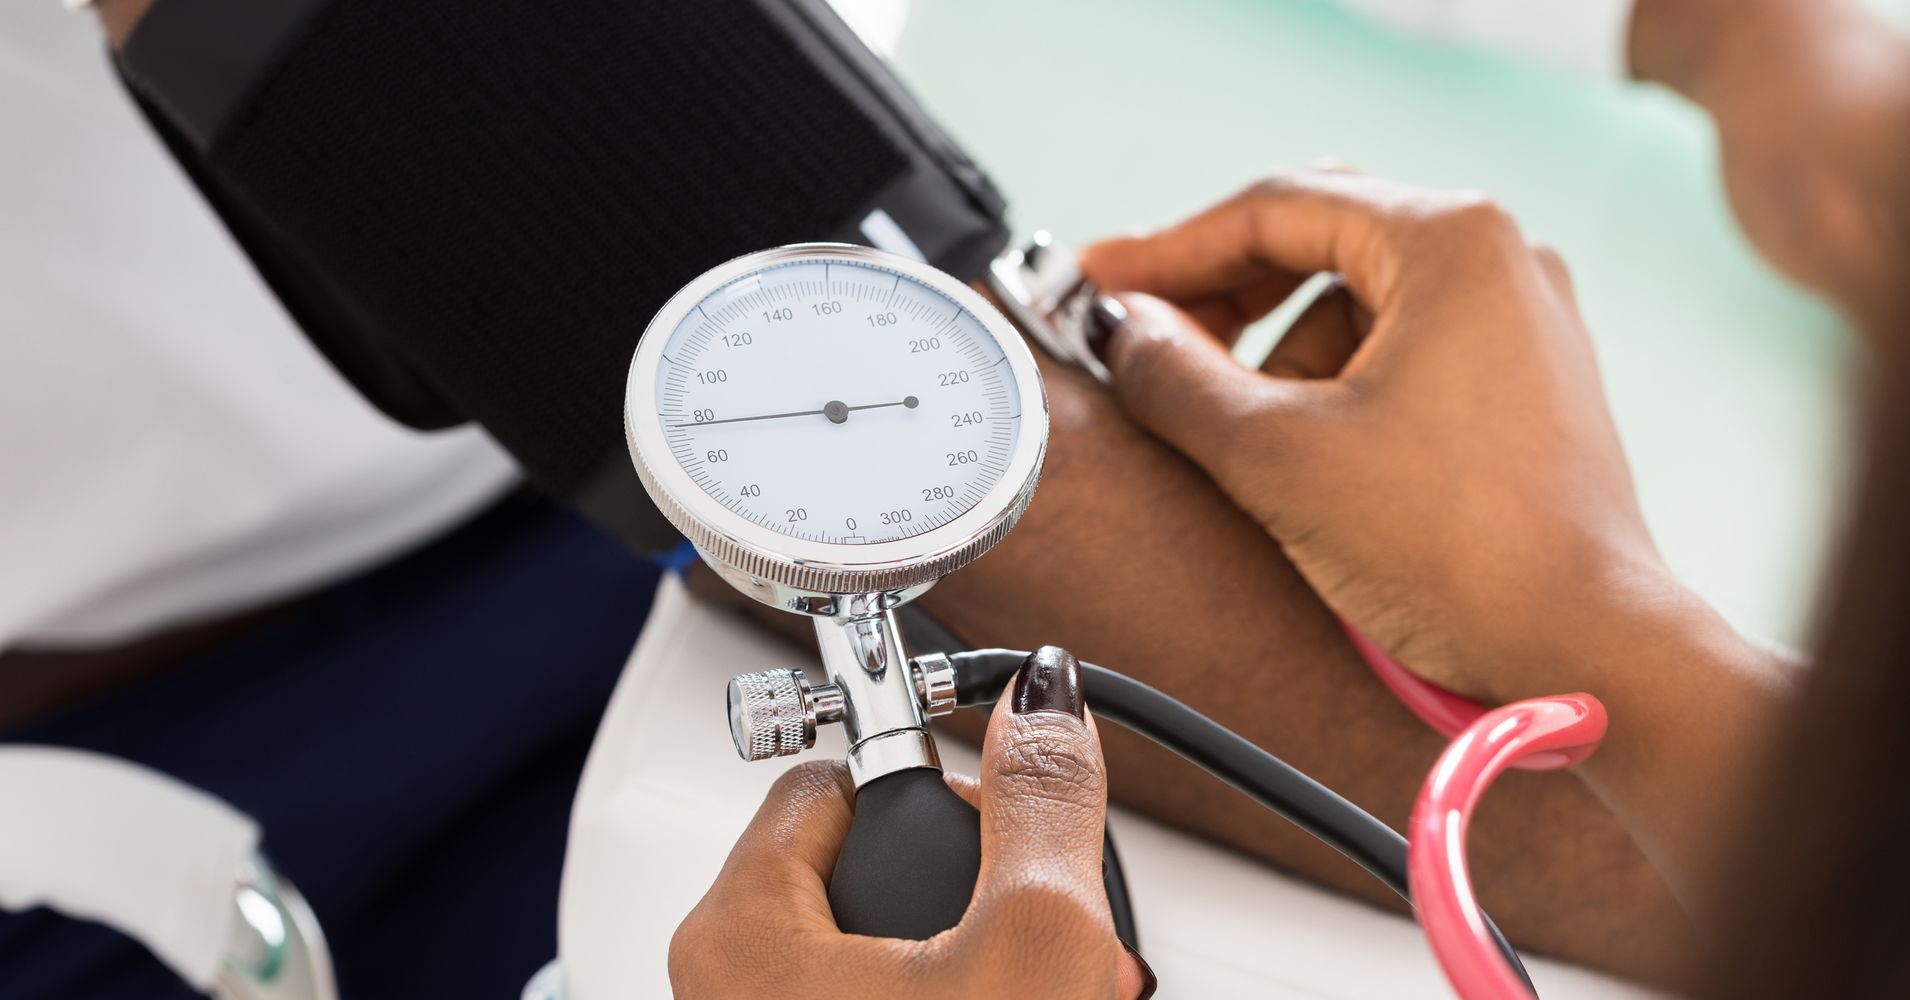 Worried About Your Brain? Check Your Blood Pressure